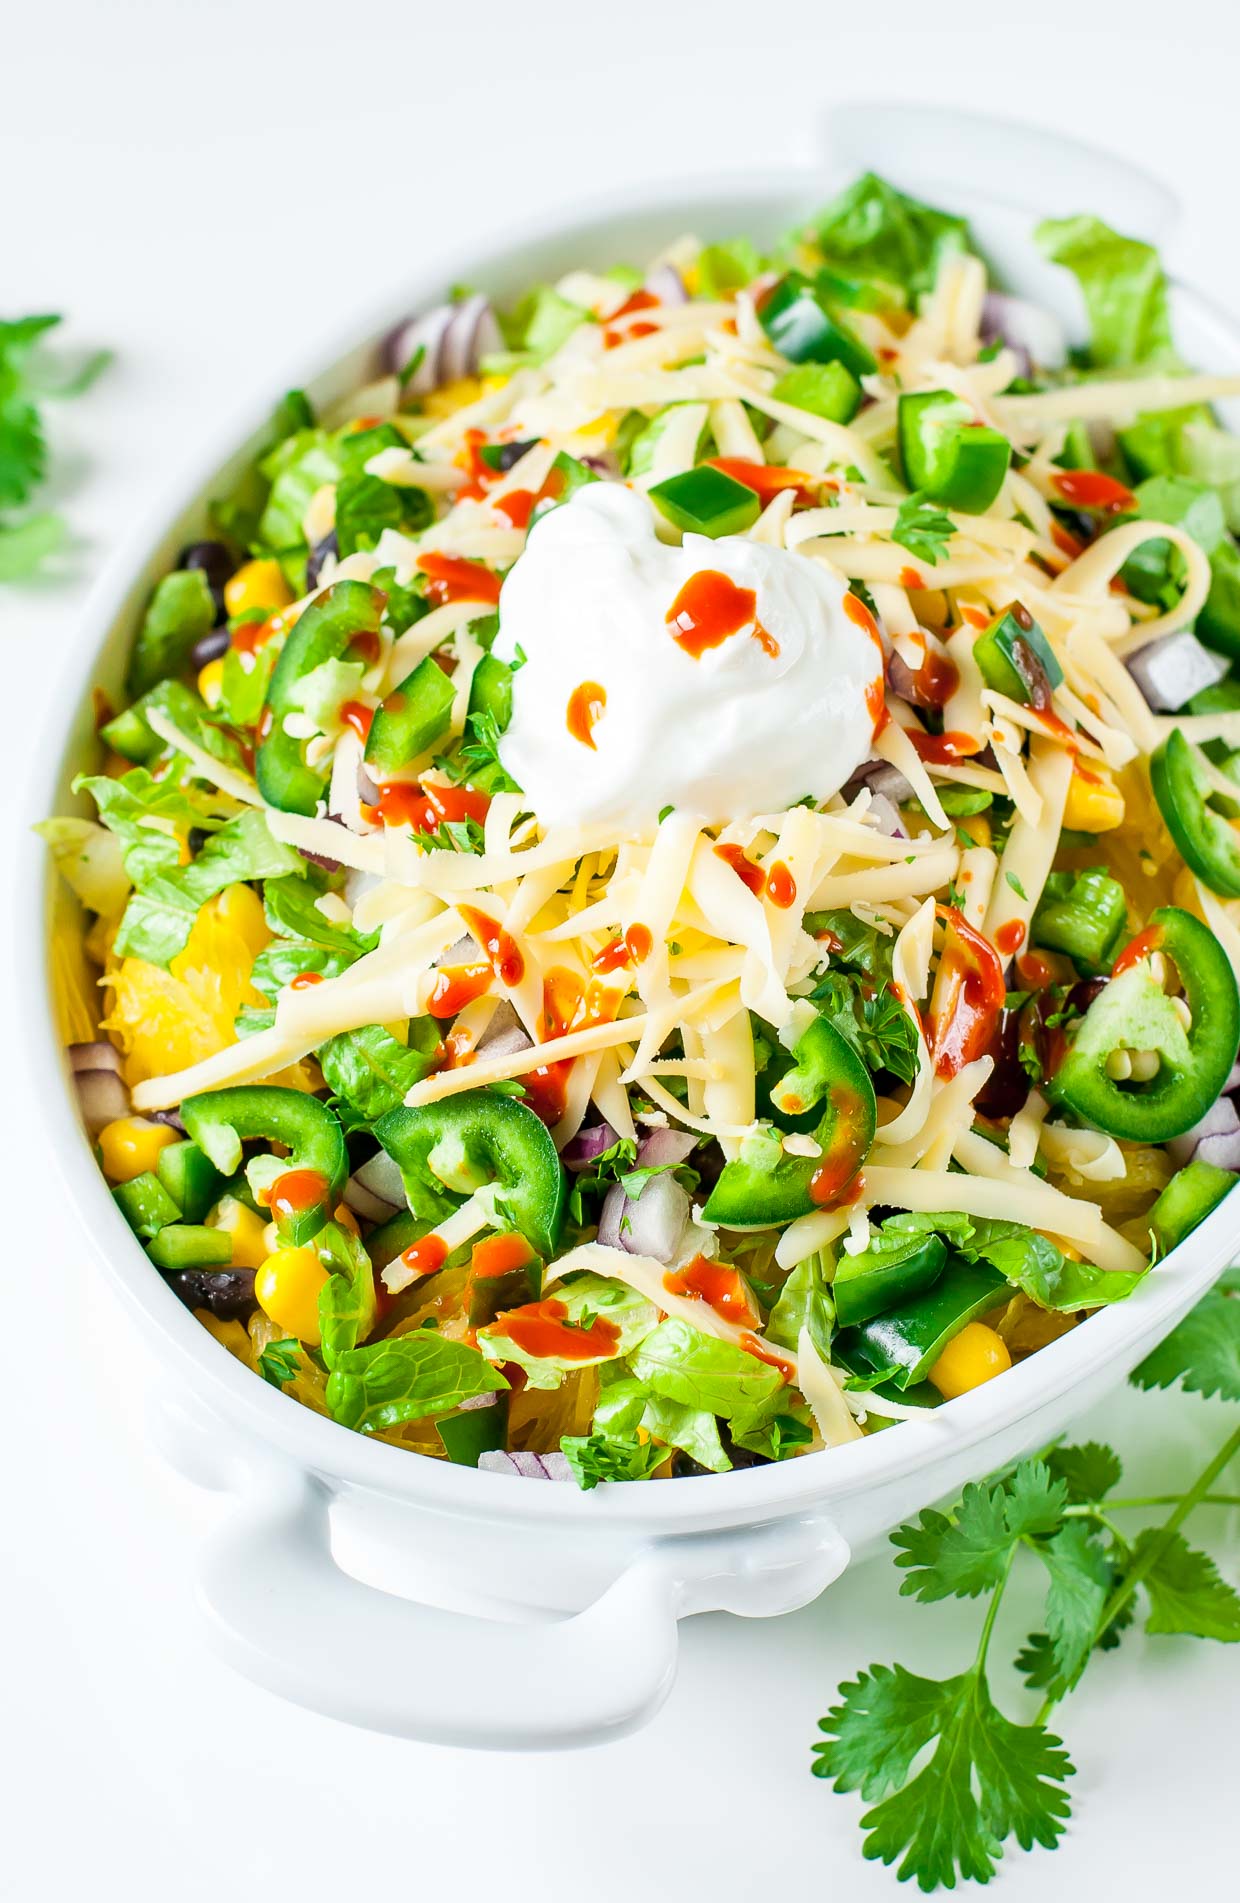 These tasty Spaghetti Squash Burrito Bowls taste just like Chipotle's uber-addictive burrito bowls and are loaded with healthy whole food ingredients!